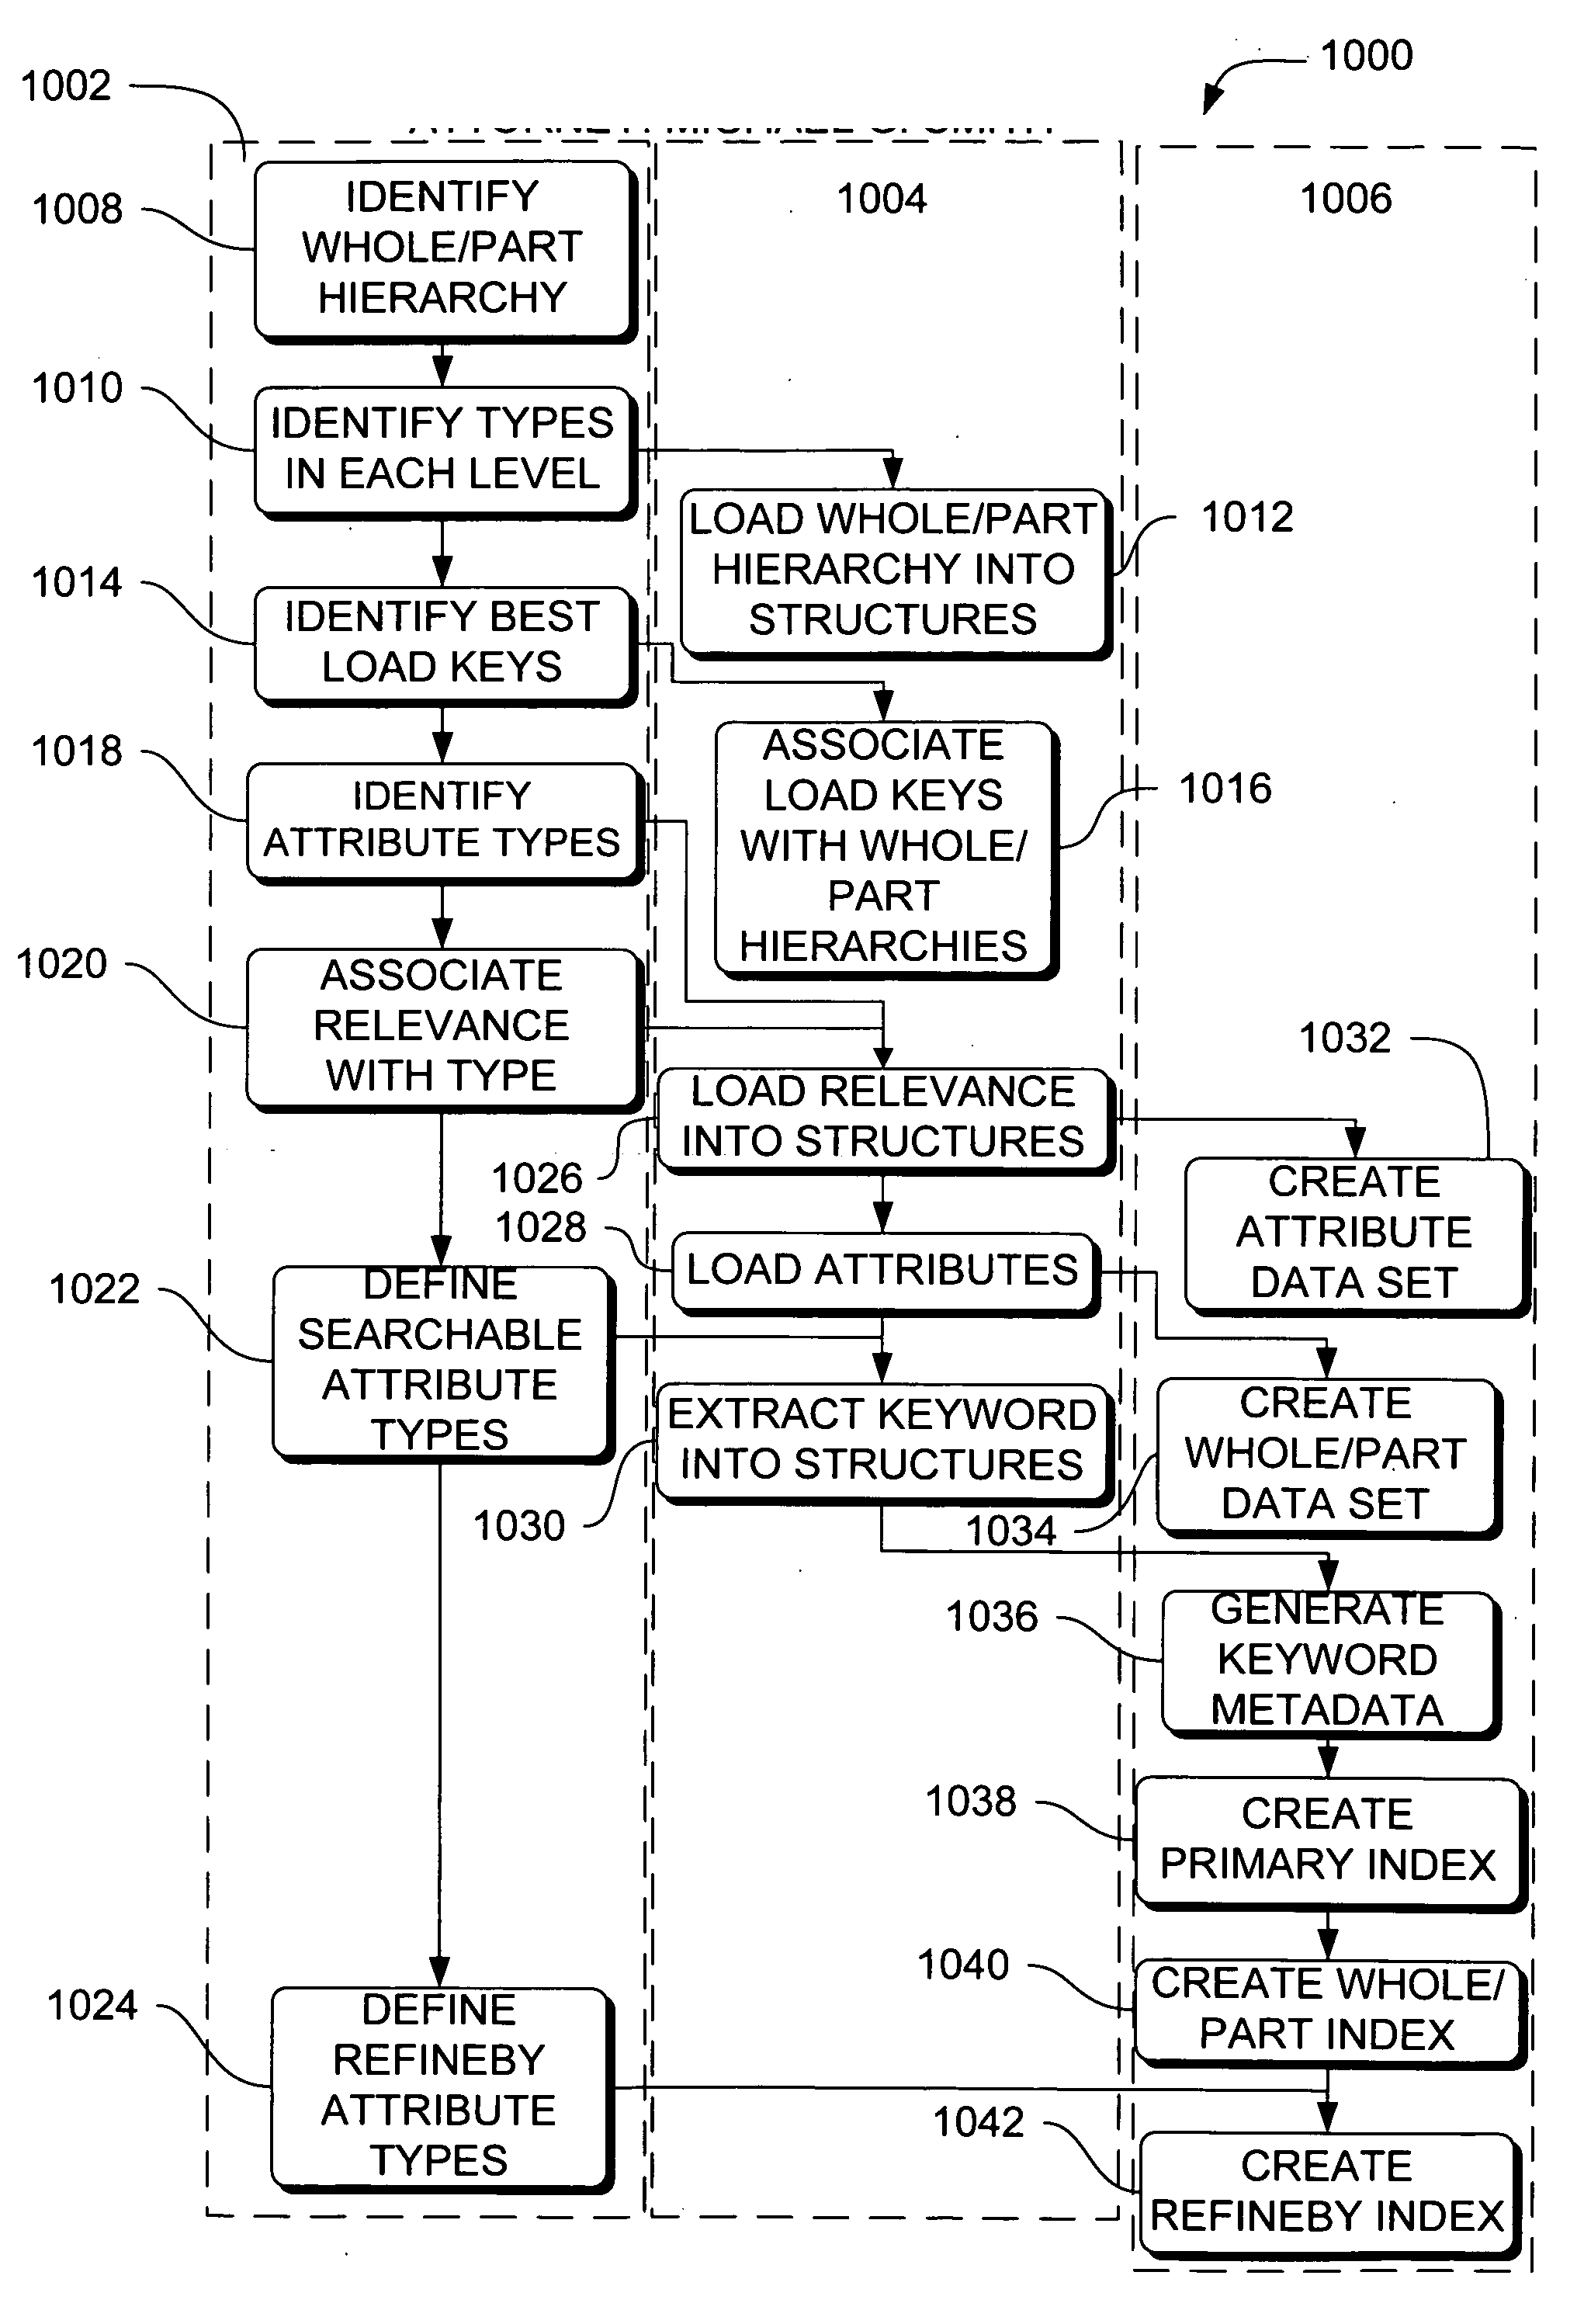 Systems, methods and apparatus of transformation and indexing of data for access by a search engine in a whole/part search